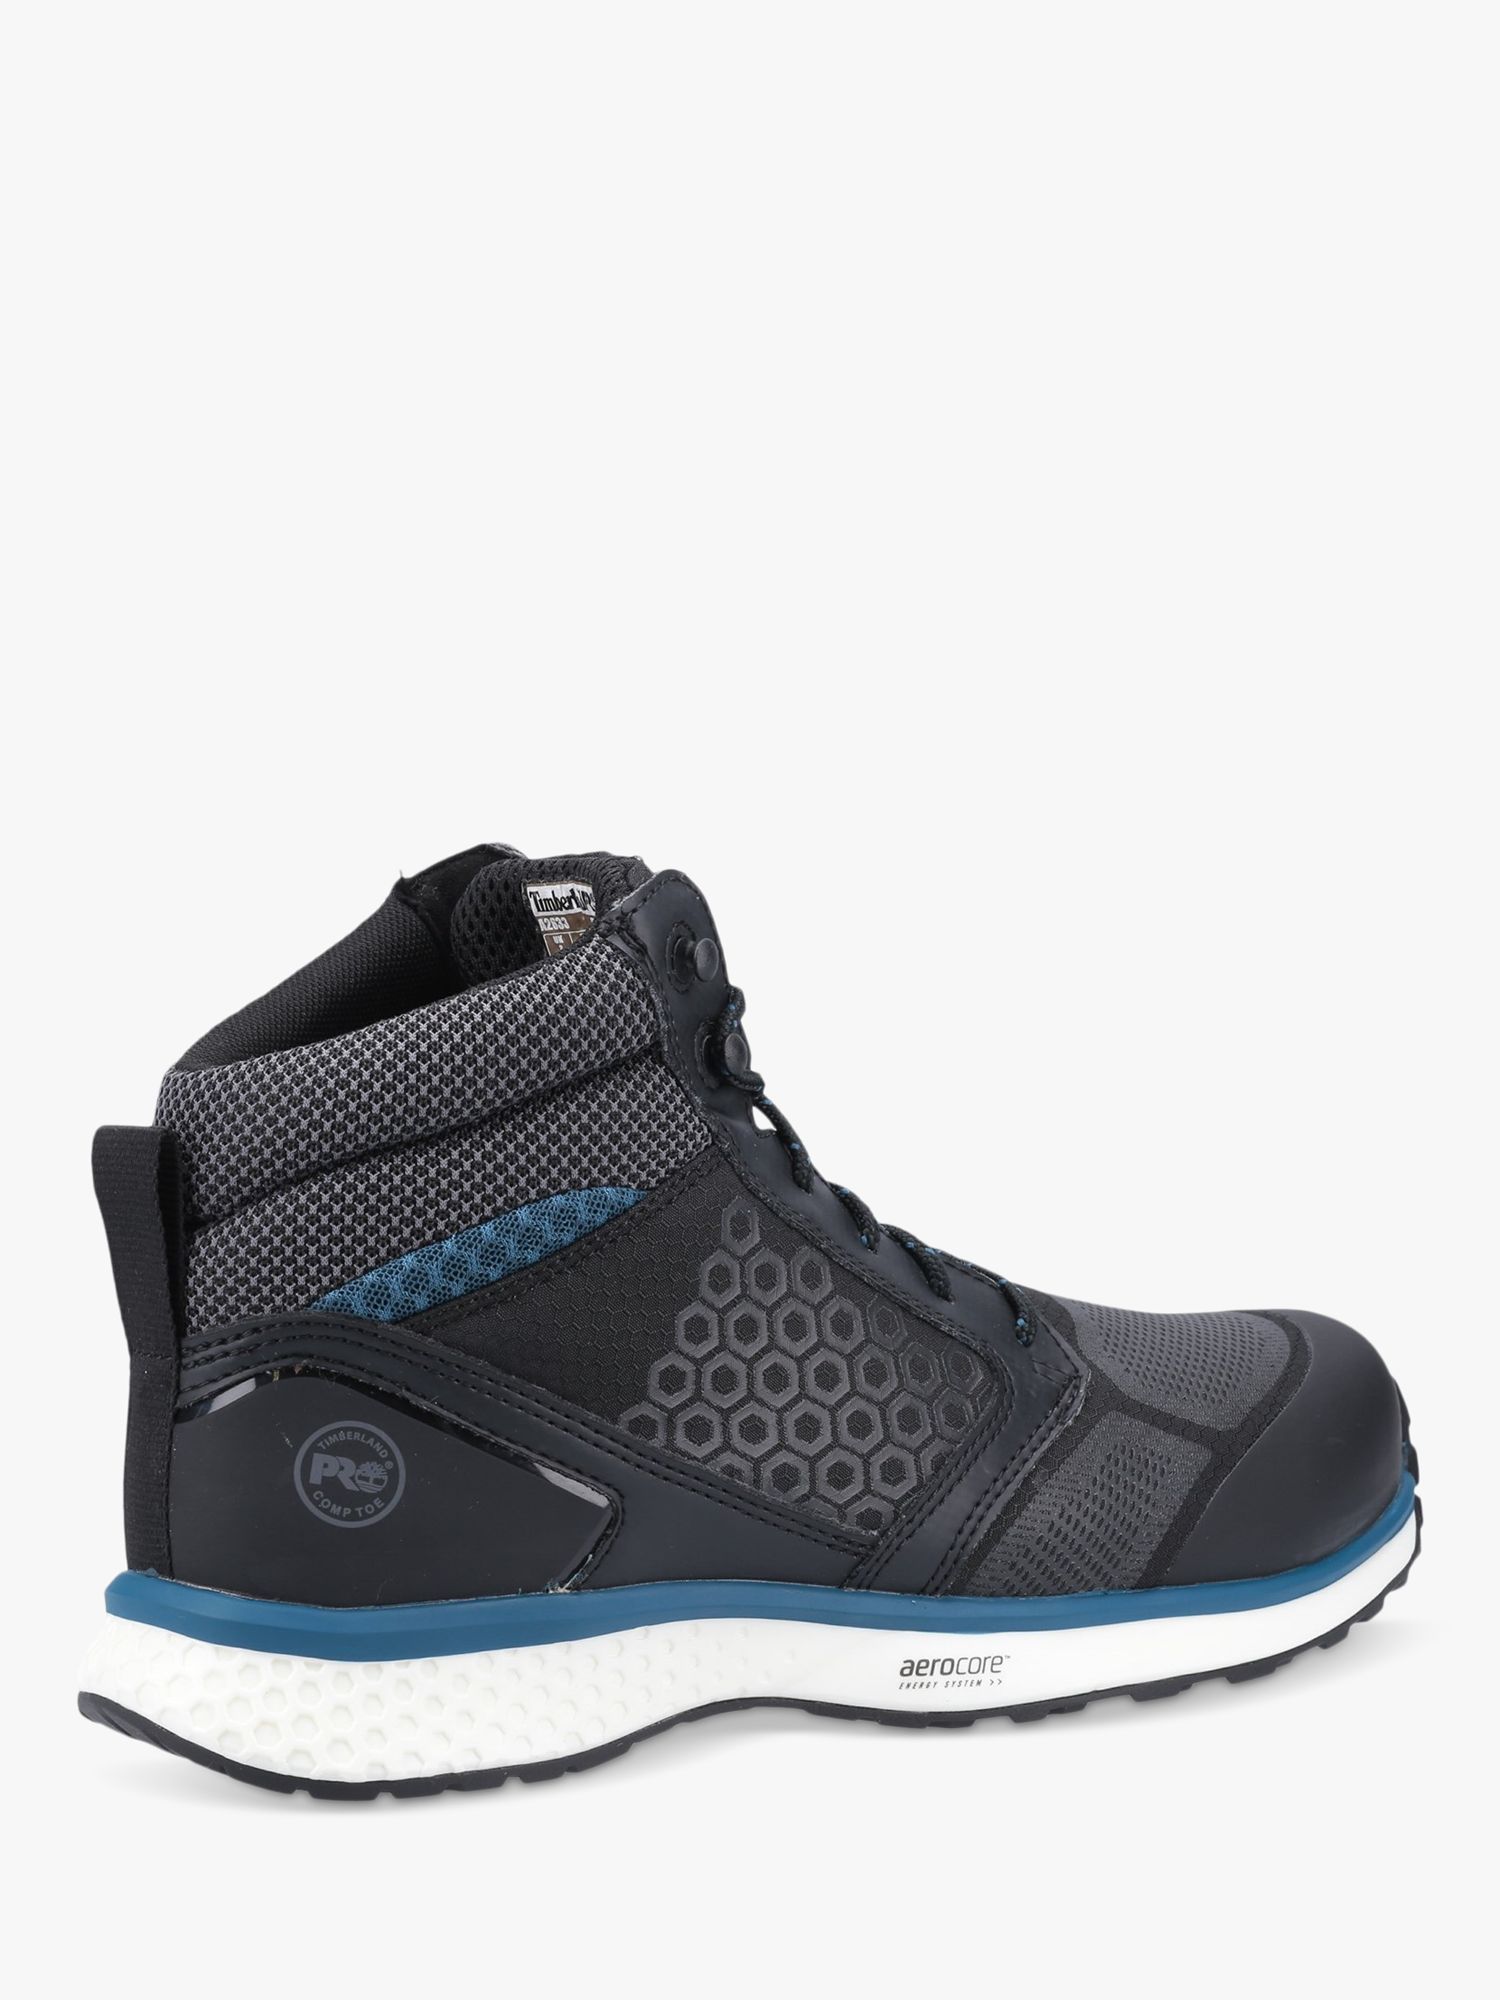 Timberland Pro Reaxion Composite Toe Work Boots, Black/Blue at John ...